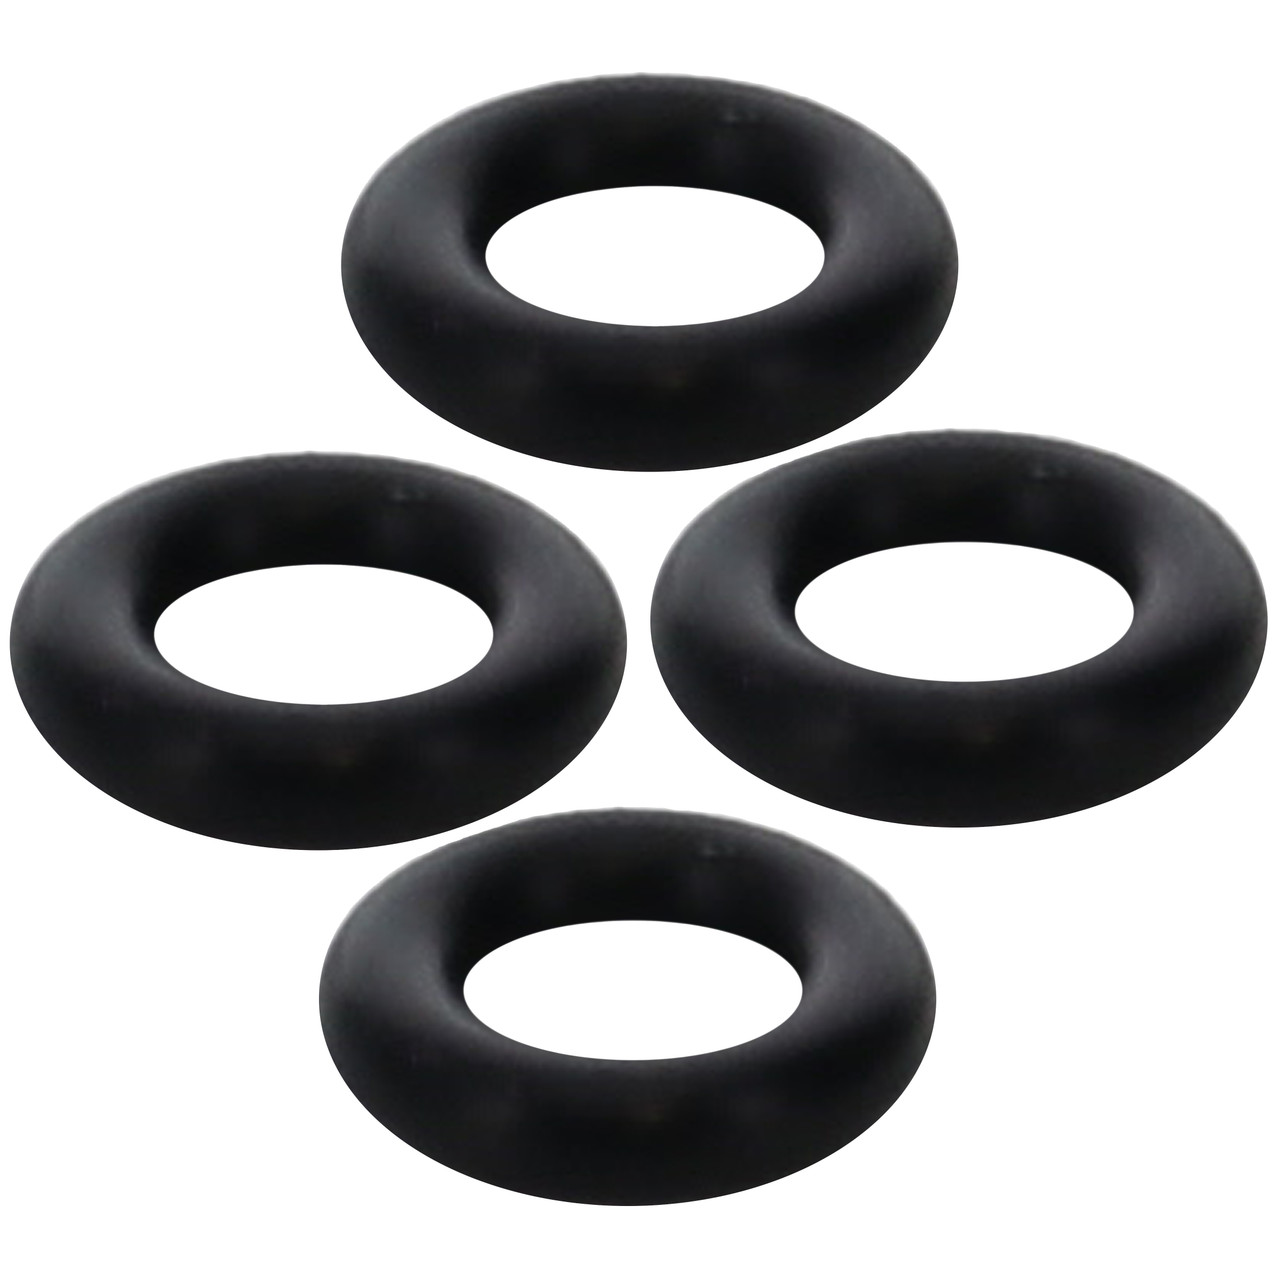 Plazmaman Plazmaclamp Replacement Rubber O-Ring for 4 inch Sleeve PC-ORING-4  | eBay